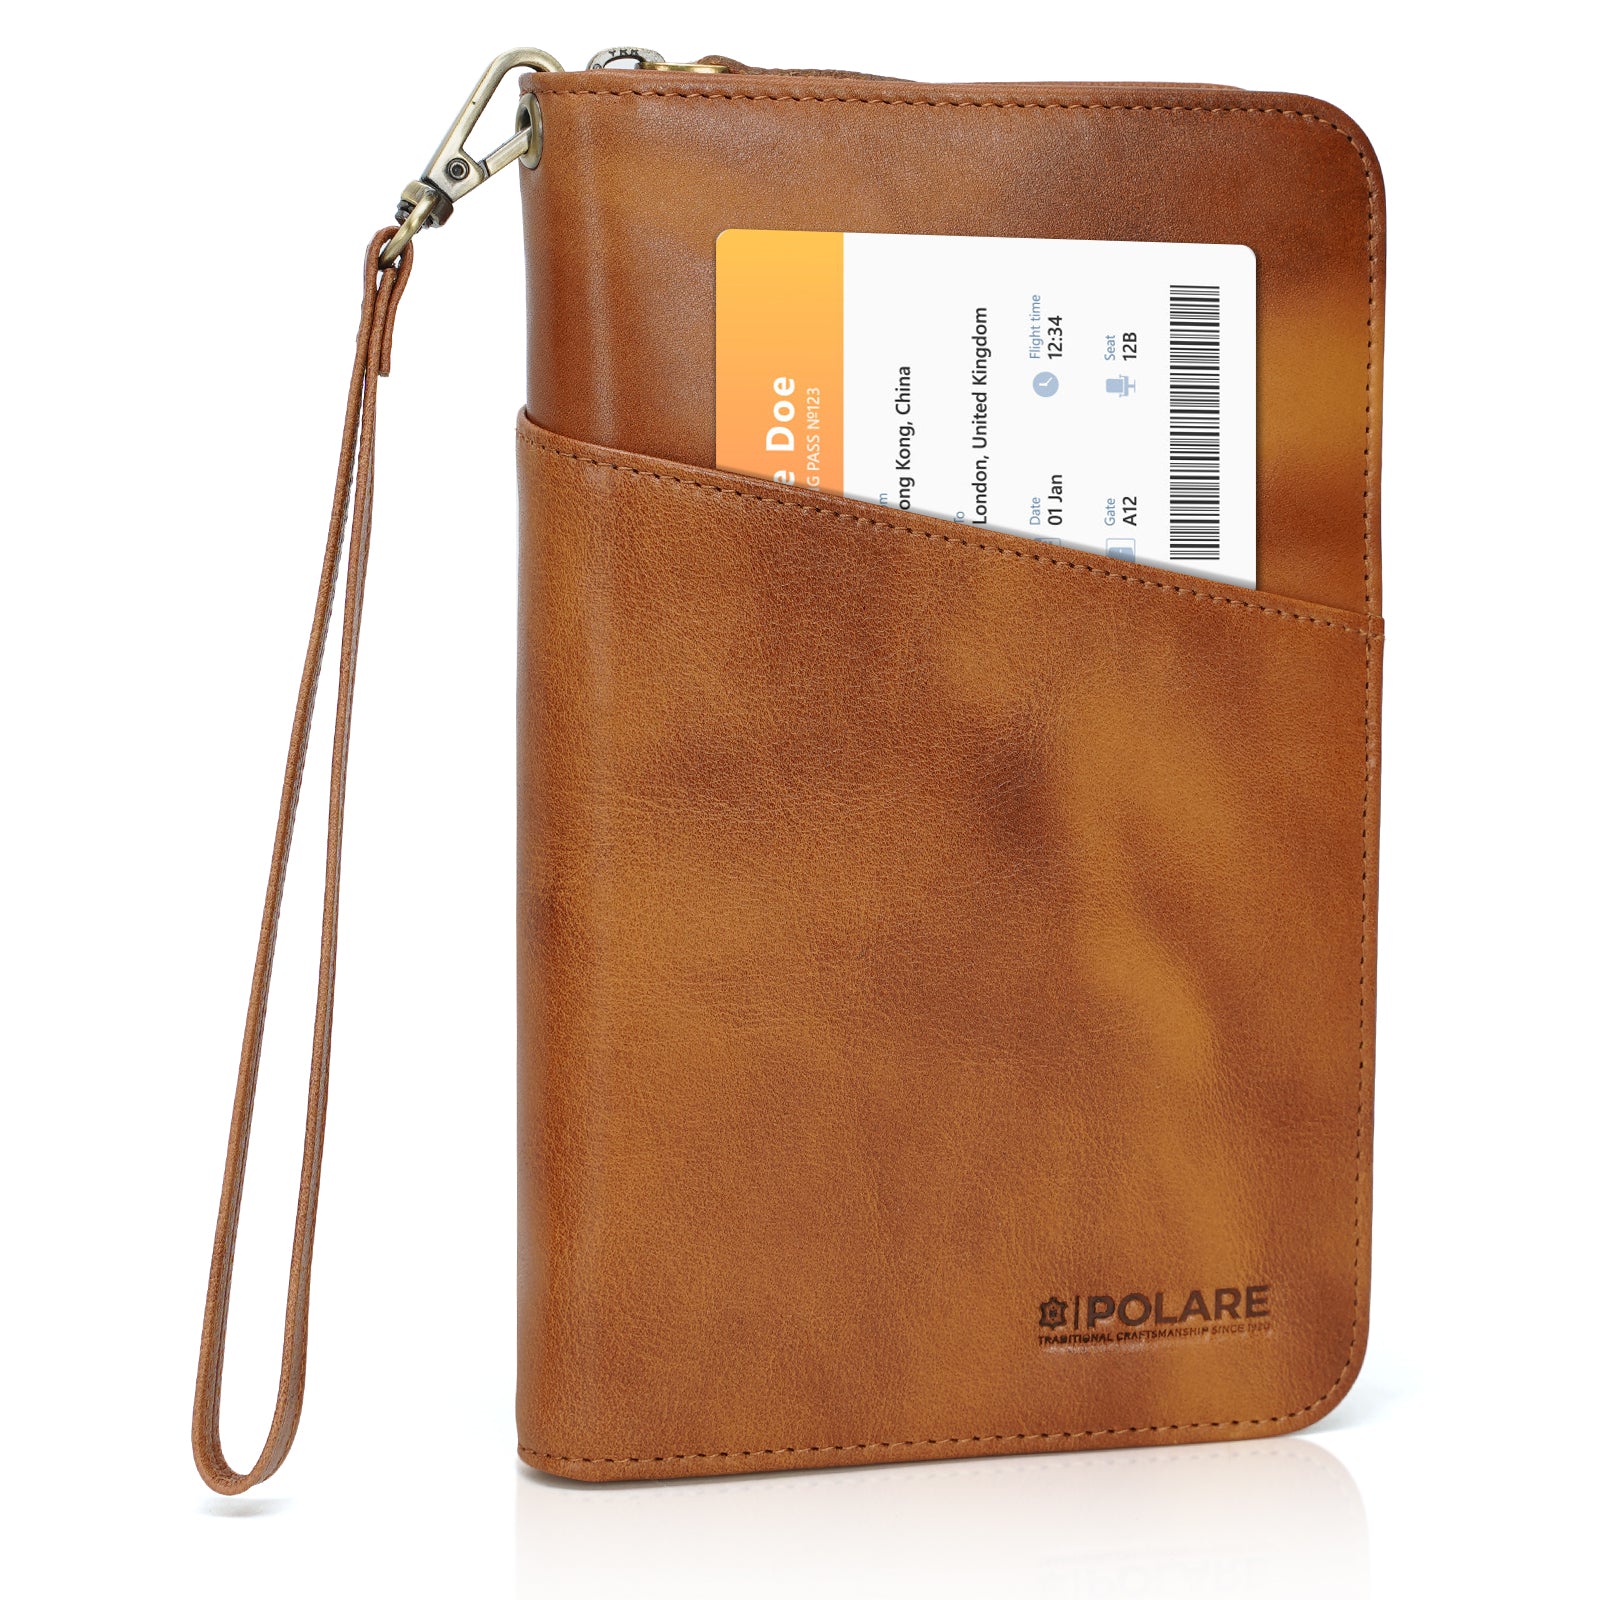 Polare Full Grain Leather RFID Blocking Family Travel Wallet Holds 6 Passports (Brown)